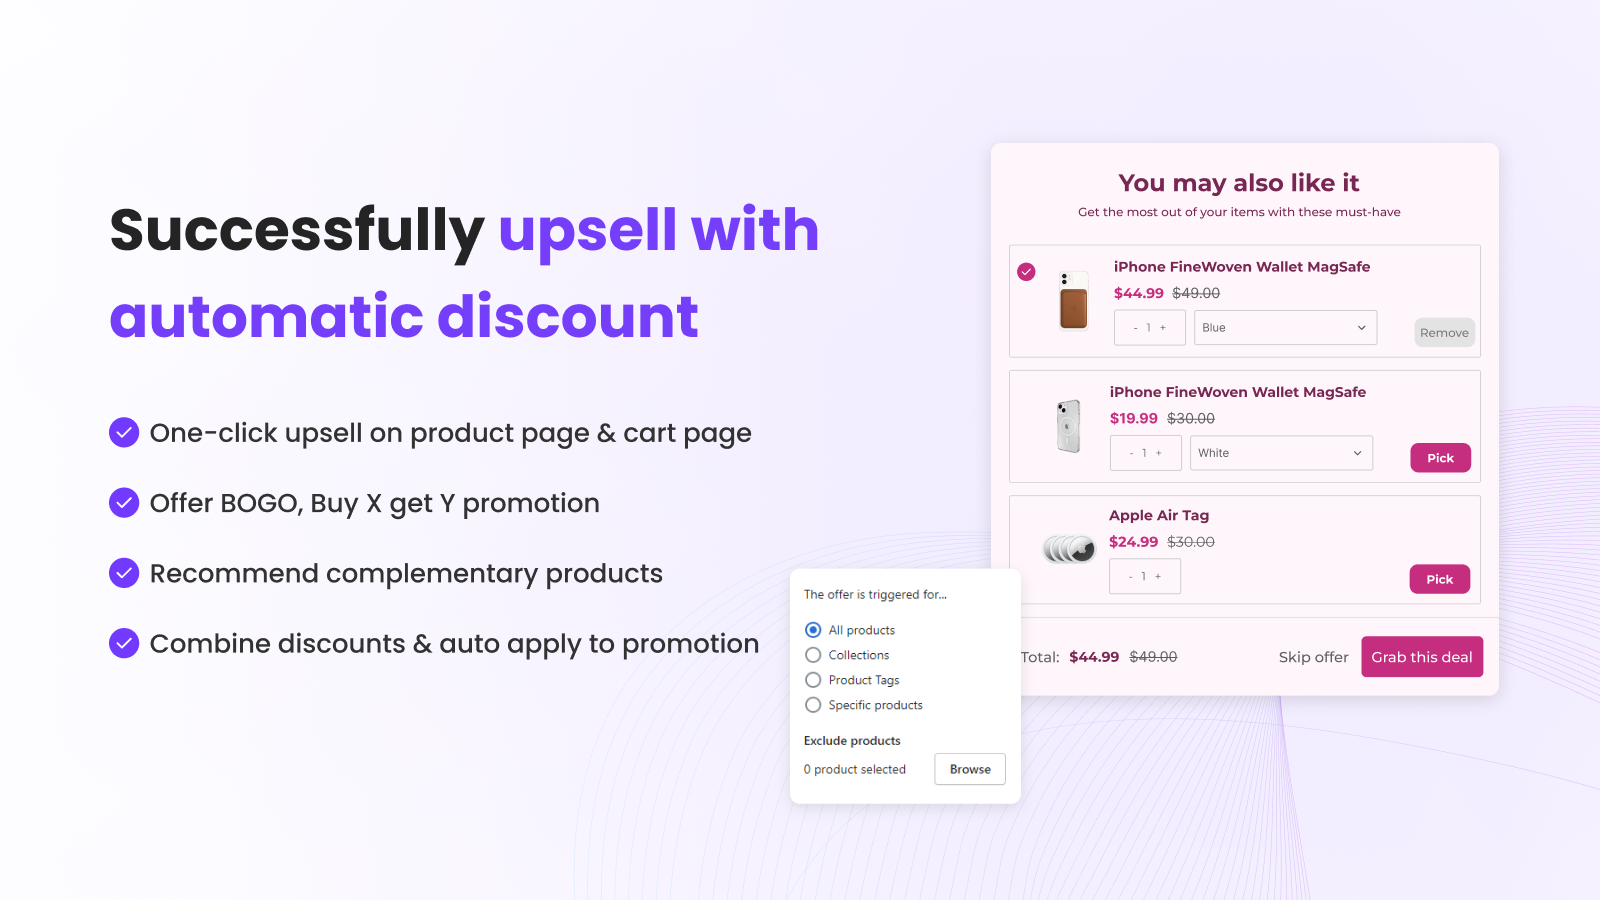 upsell, cross sell (buy x get y, bogo) using automatic discount